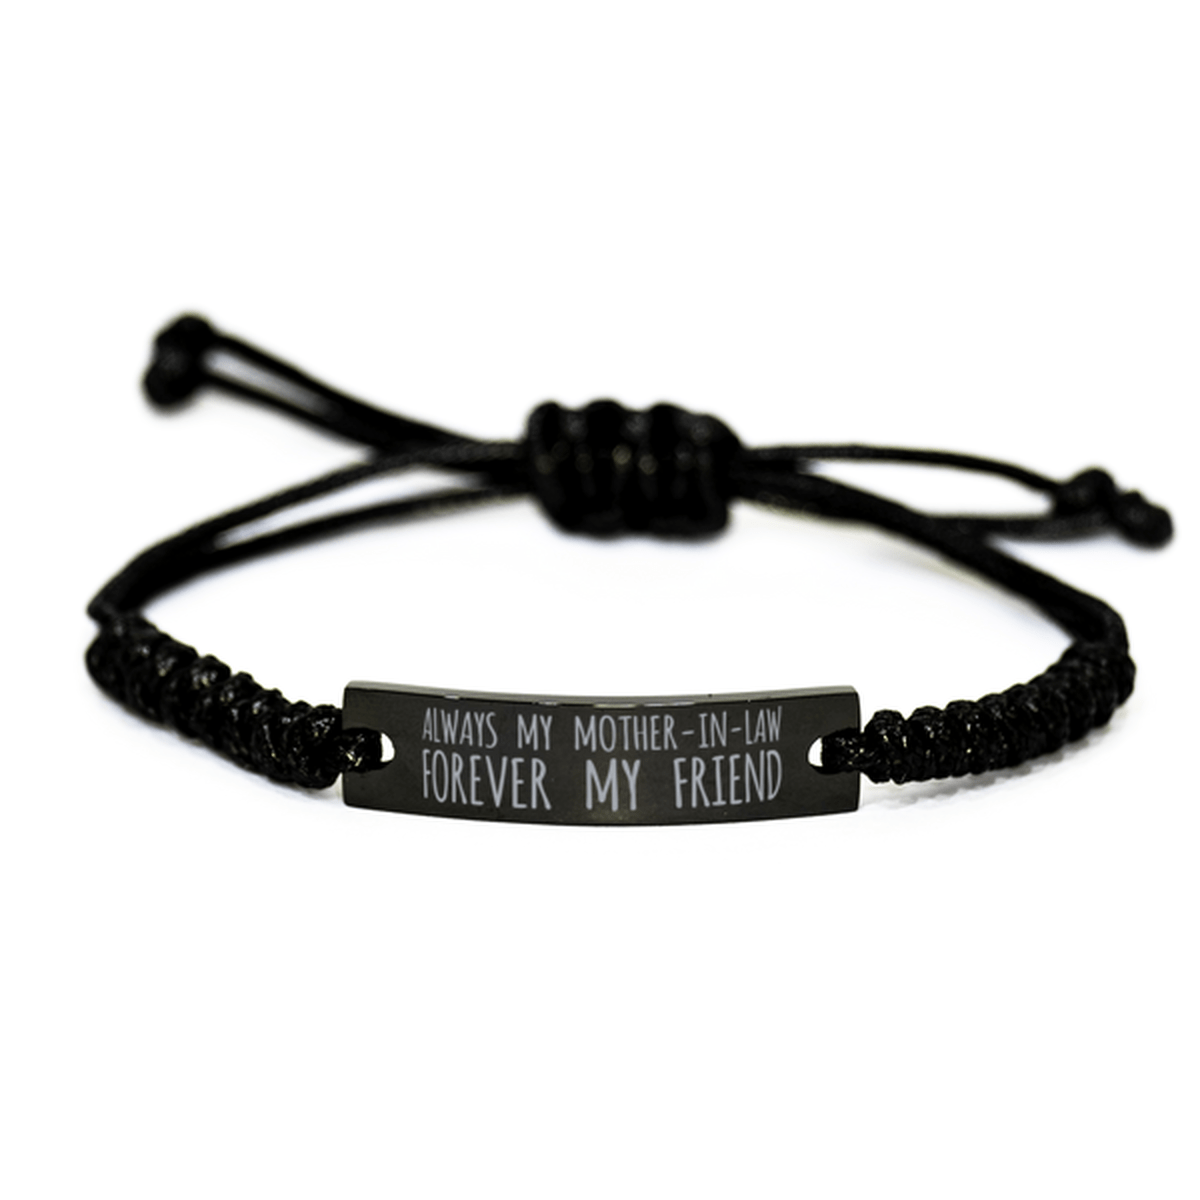 Inspirational Mother-In-Law Black Rope Bracelet, Always My Mother-In-Law Forever My Friend, Best Birthday Gifts For Family